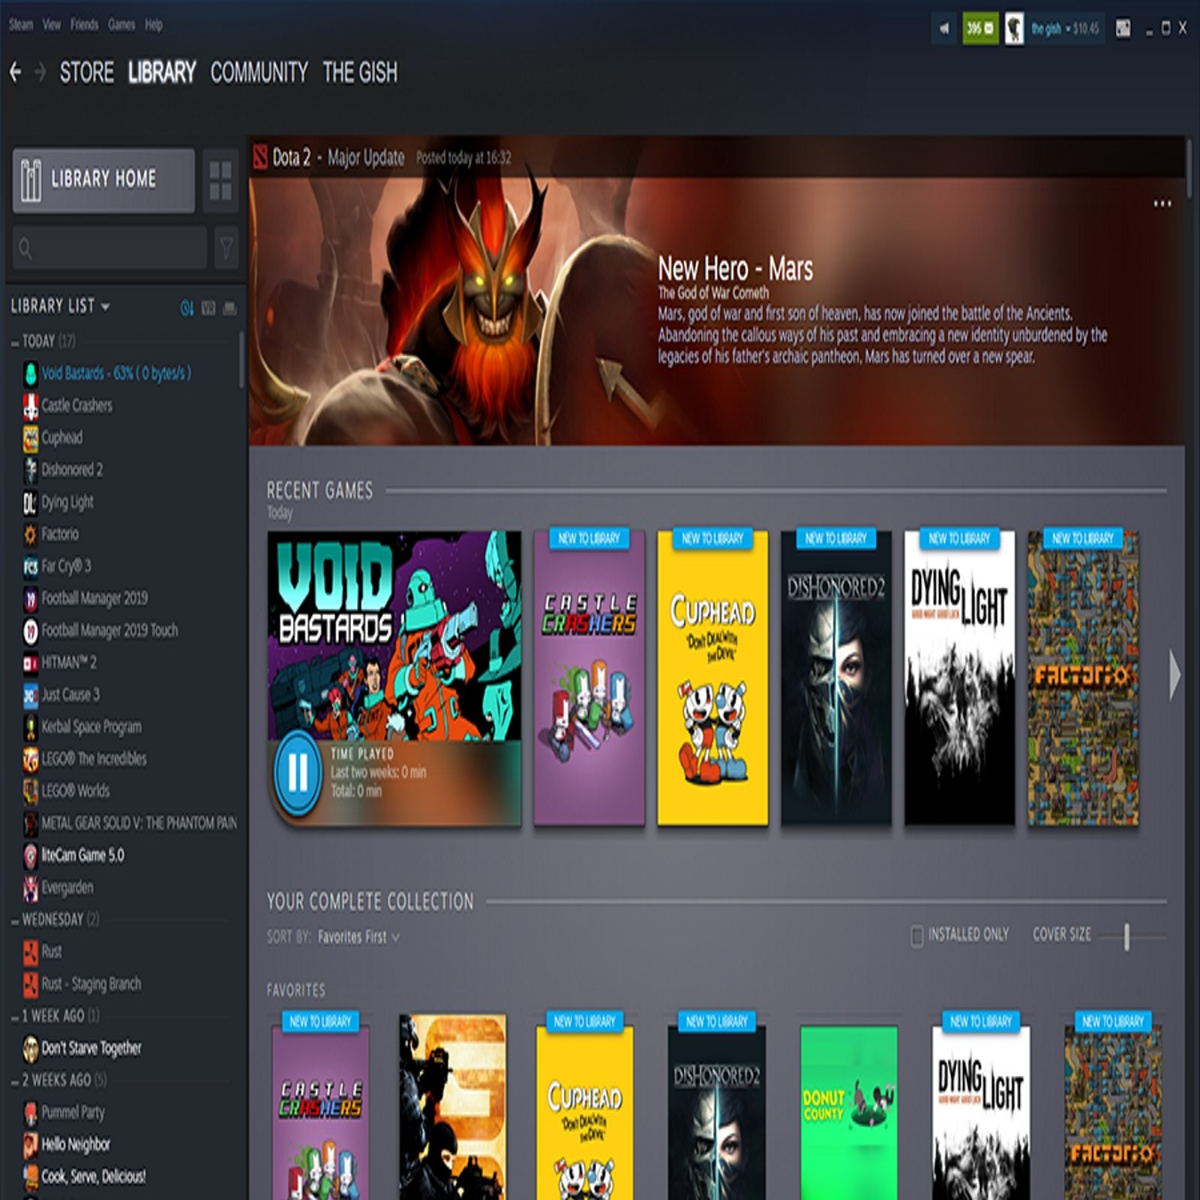 Events, Library Overhaul Coming to Valve's Steam Store